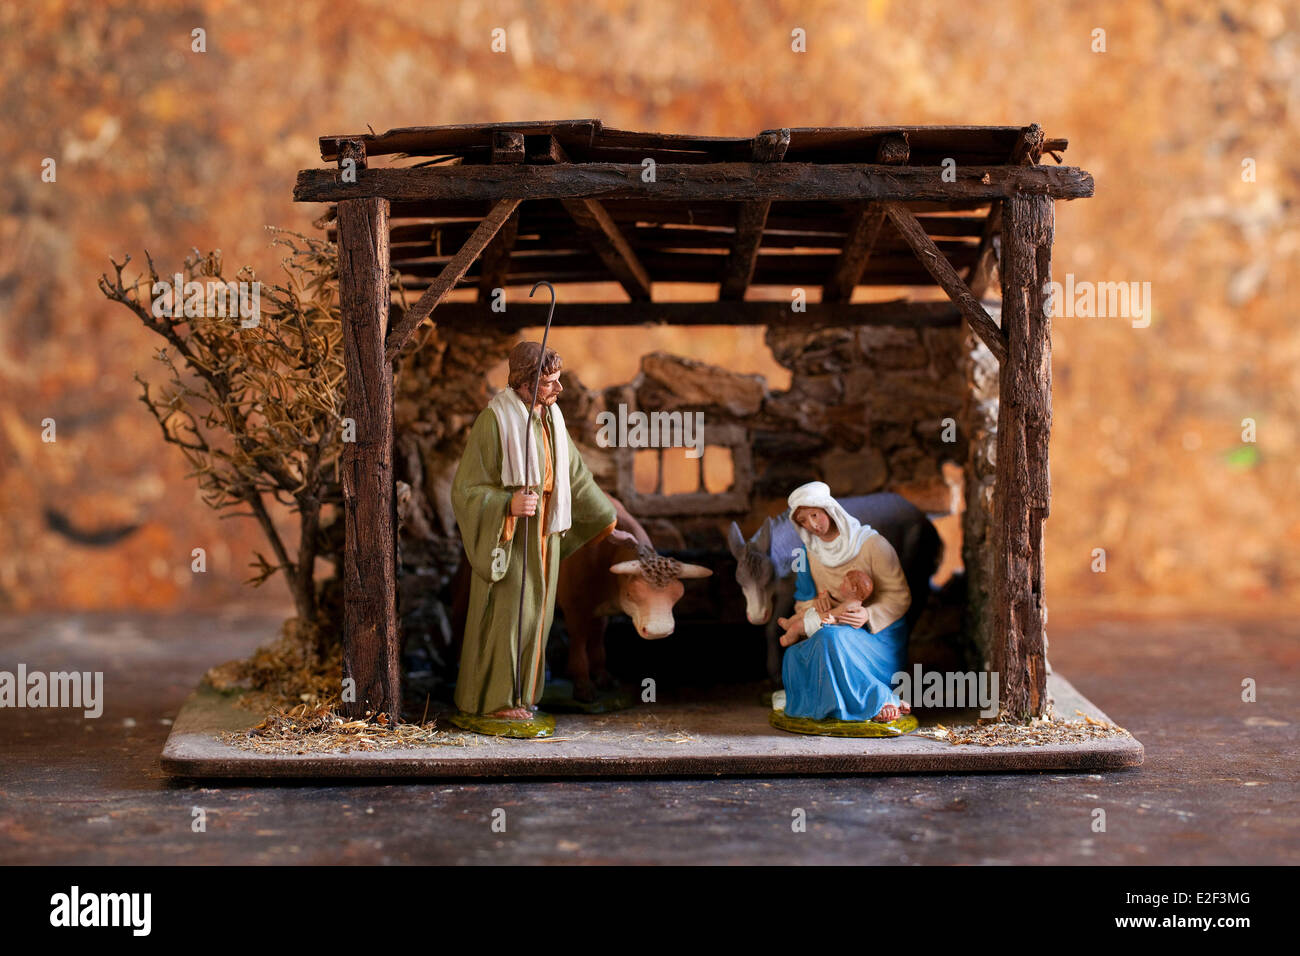 France, Bouches du Rhone, Castel figurines, nativity, private collection Stock Photo